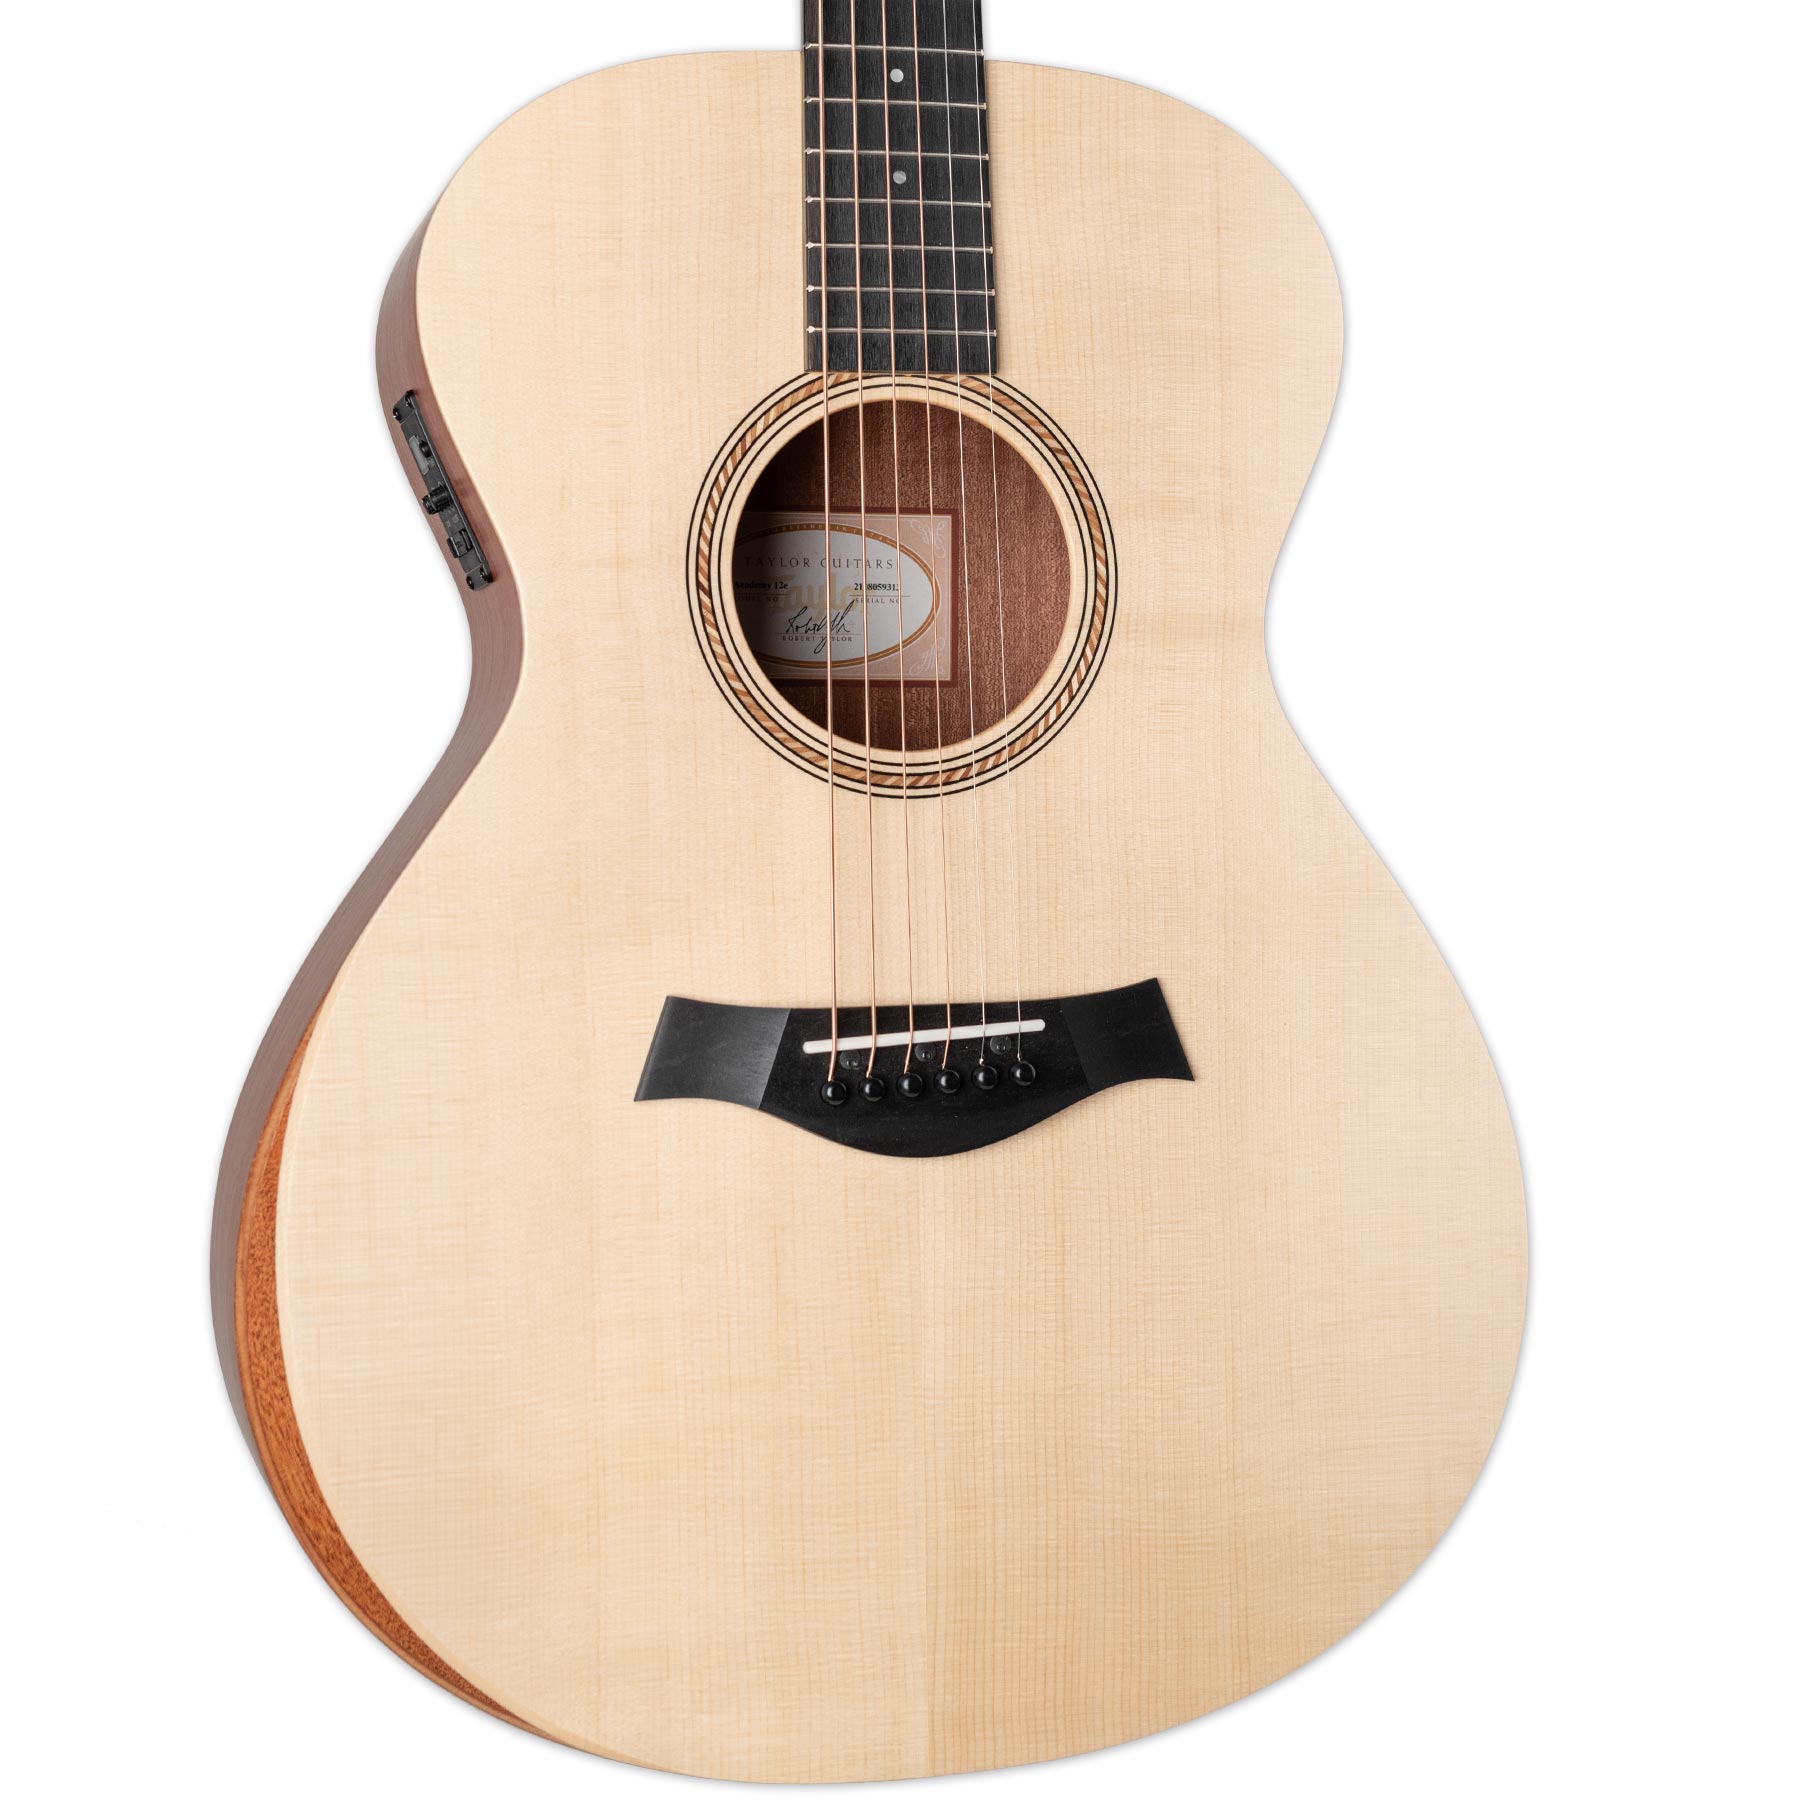 TAYLOR ACADEMY 12e ACOUSTIC GUITAR WITH BAG